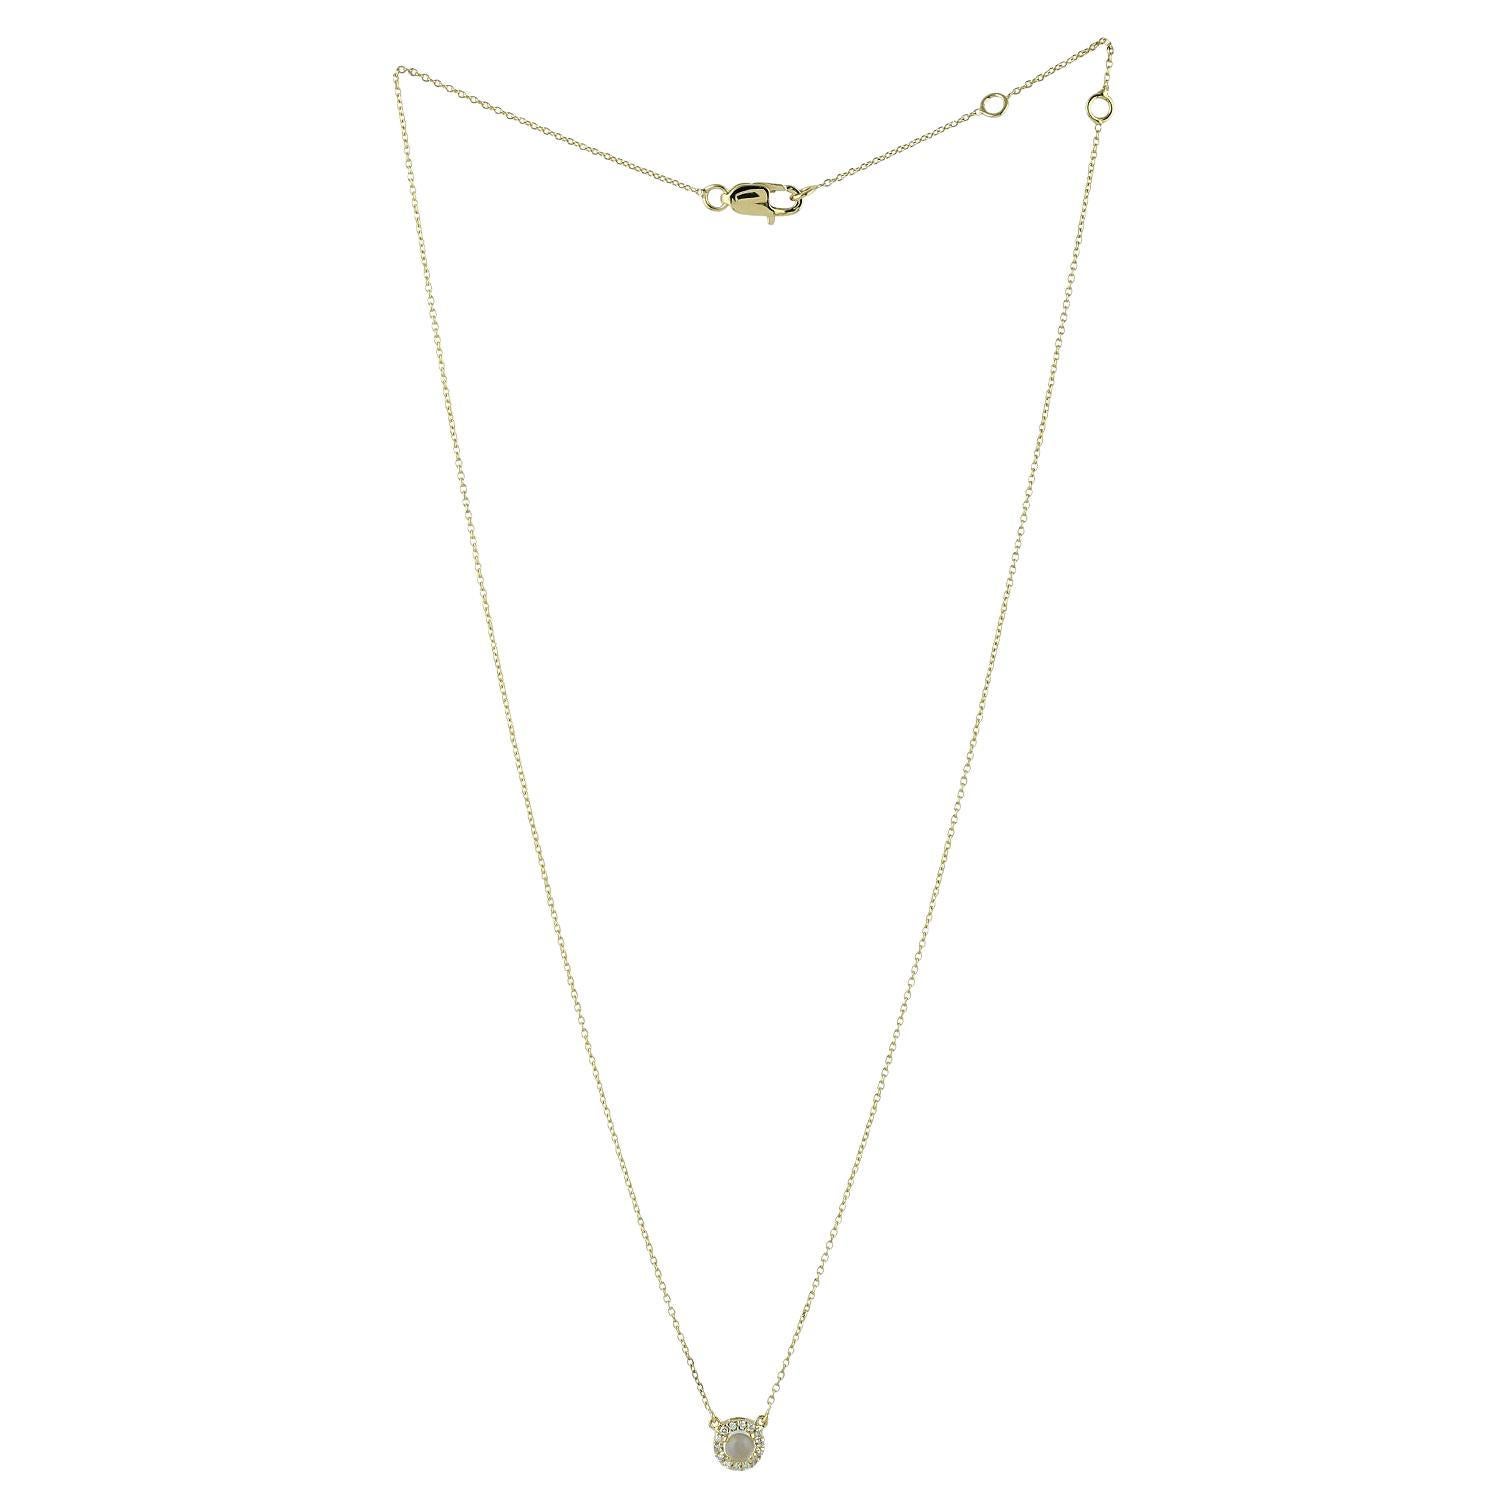 Moonstone & Pave Diamond Pendant Chain Necklace Made In 18k Yellow Gold For Sale